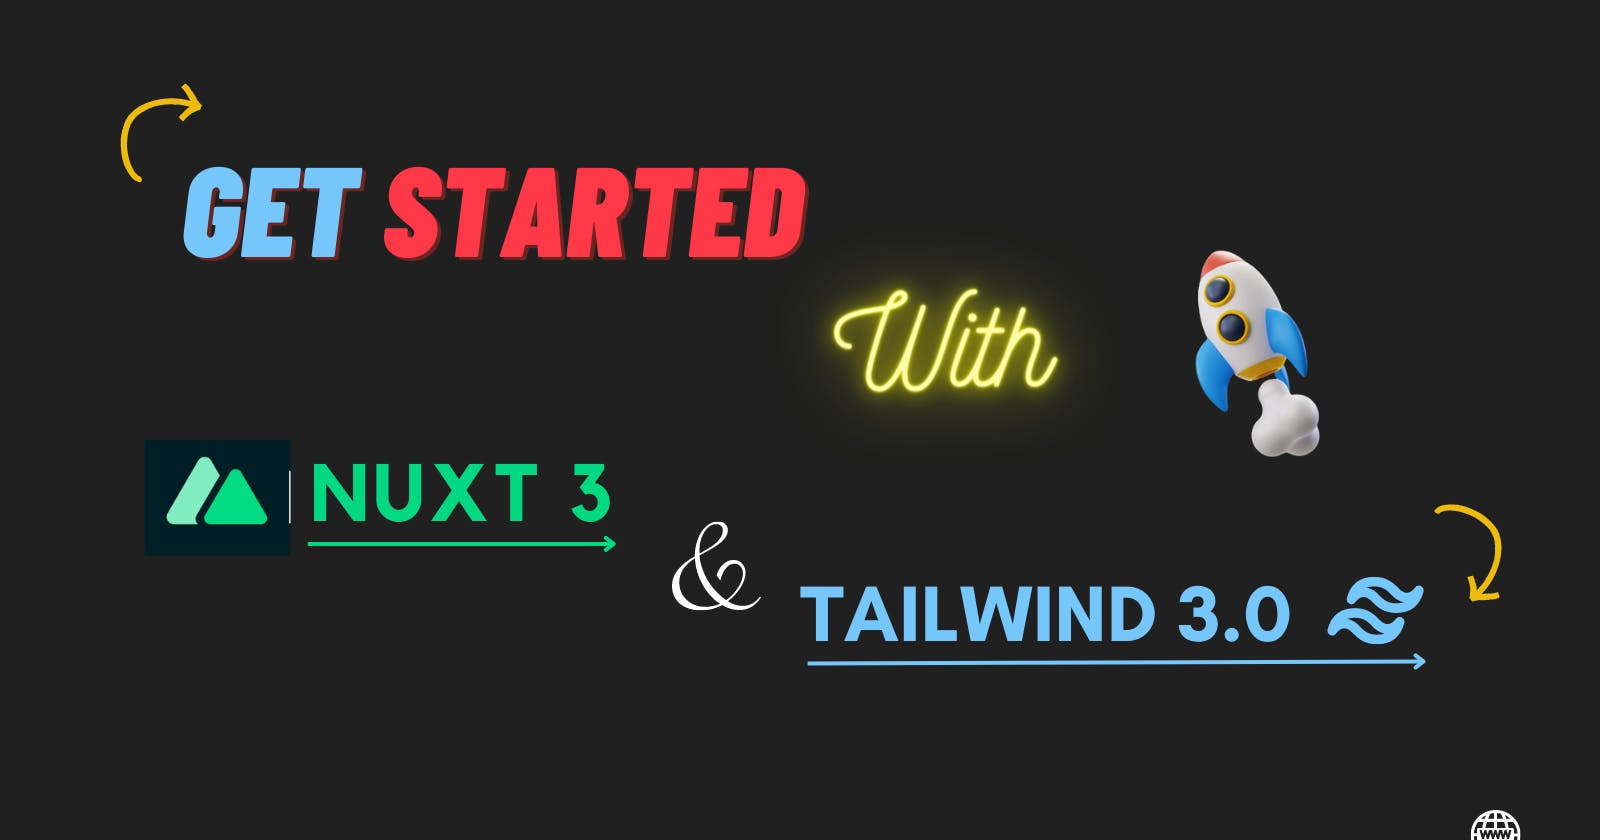 Get started with Nuxt3 and Tailwindcss